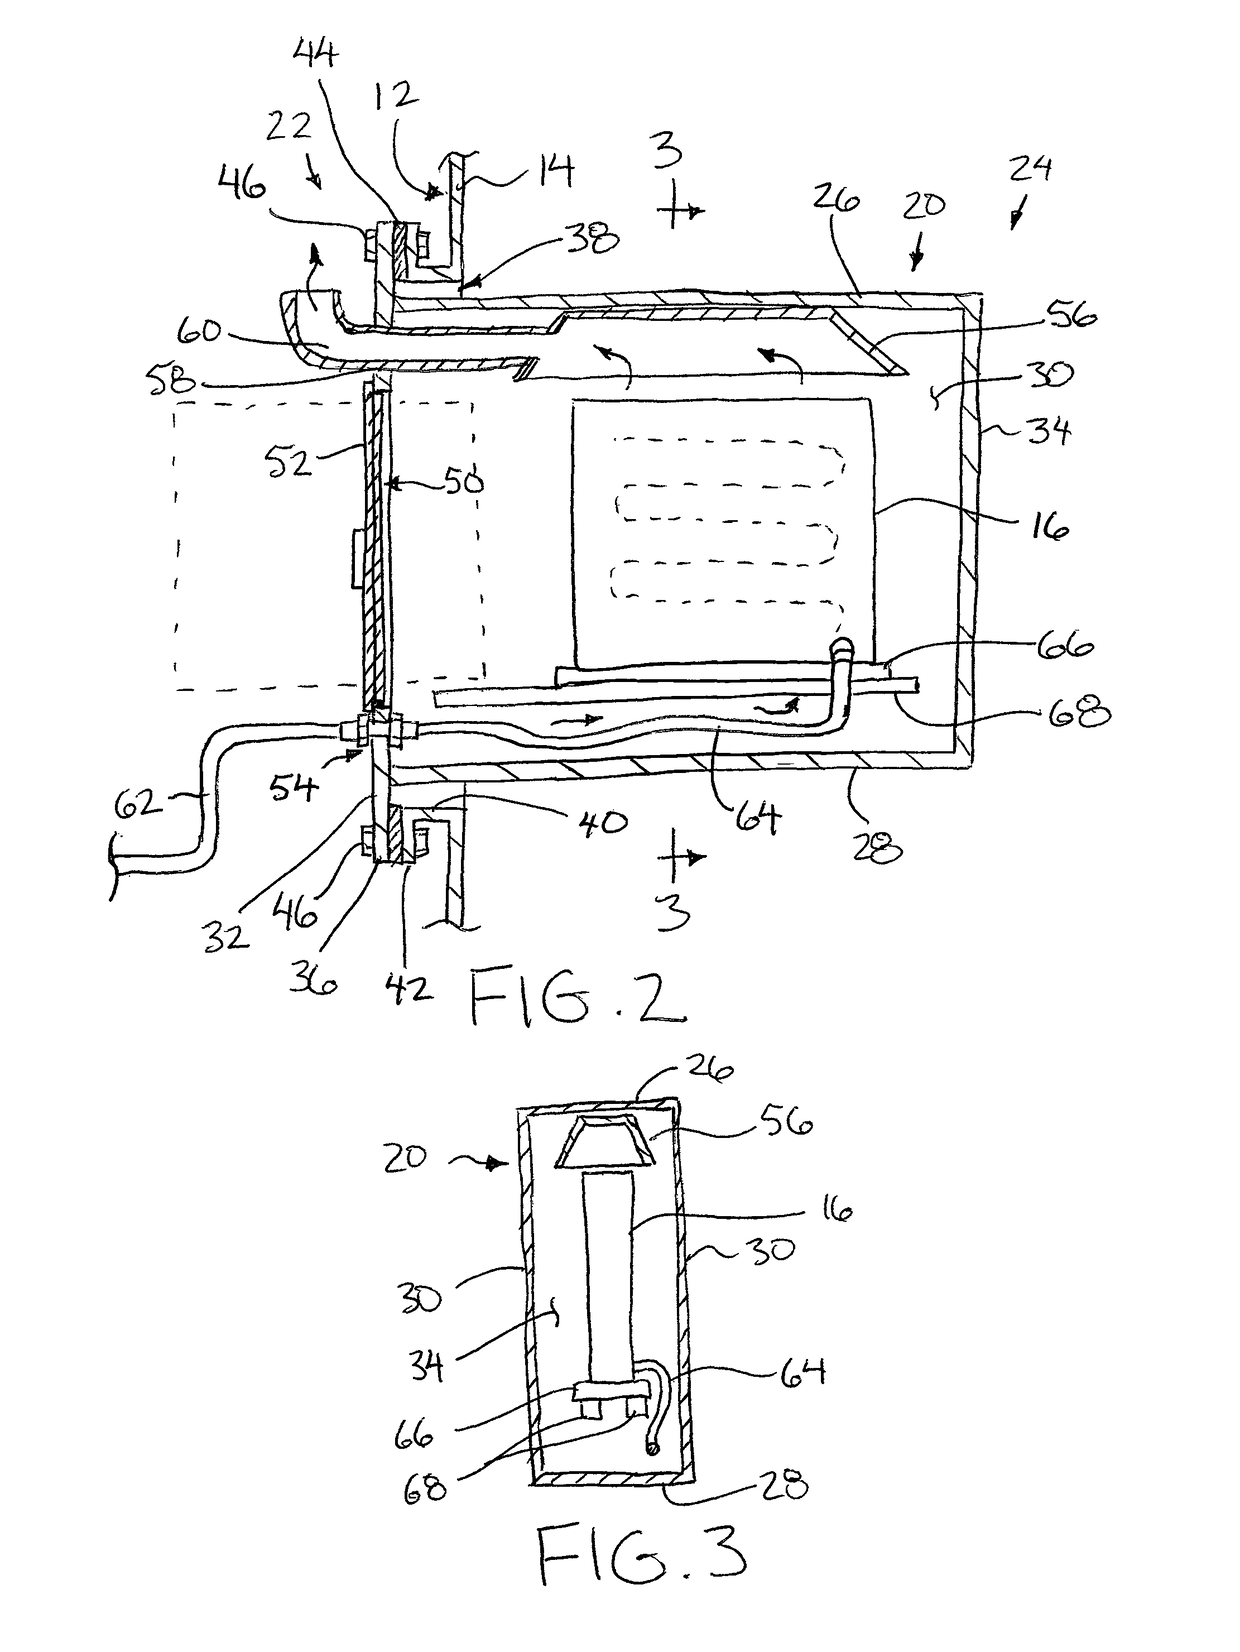 Catalytic heating assembly for an oil storage tank